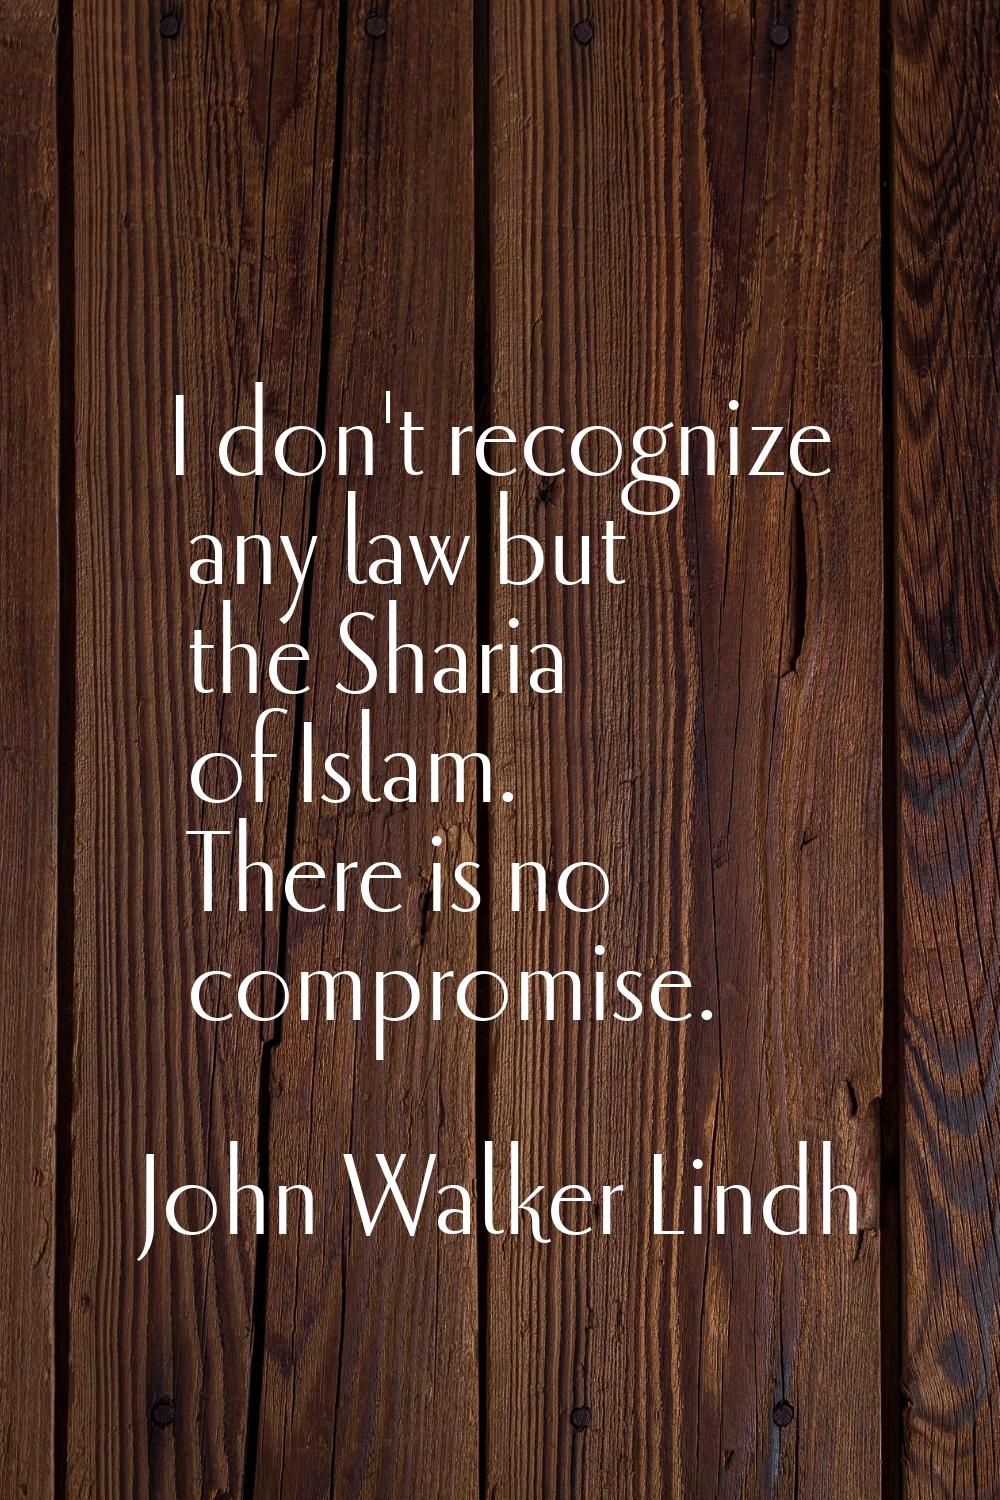 I don't recognize any law but the Sharia of Islam. There is no compromise.